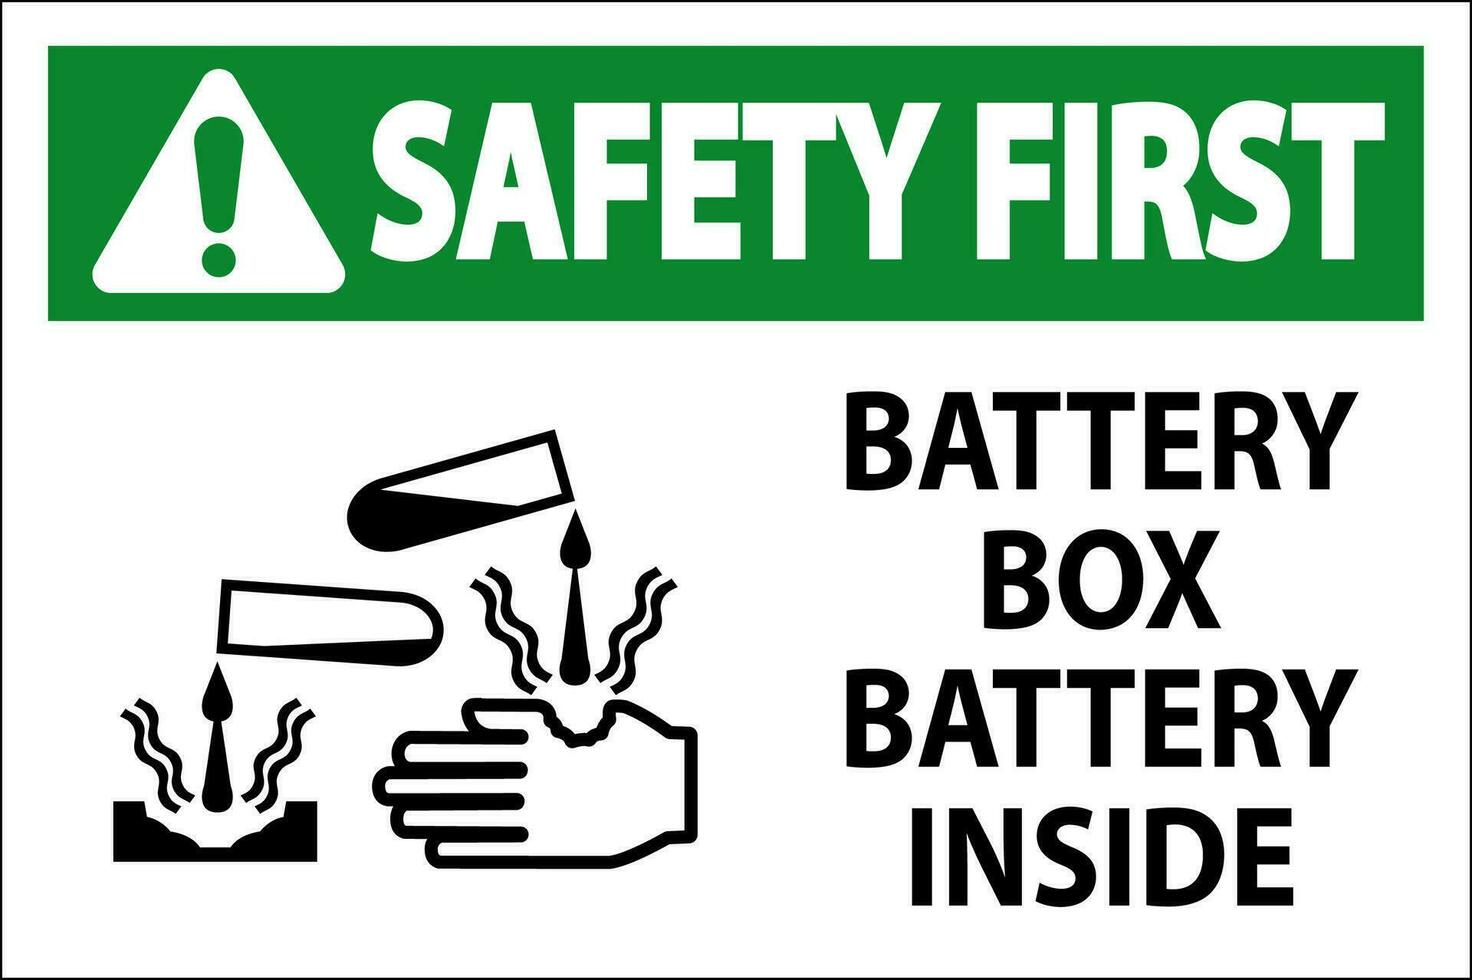 Safety First Battery Box Battery Inside Sign With Symbol vector